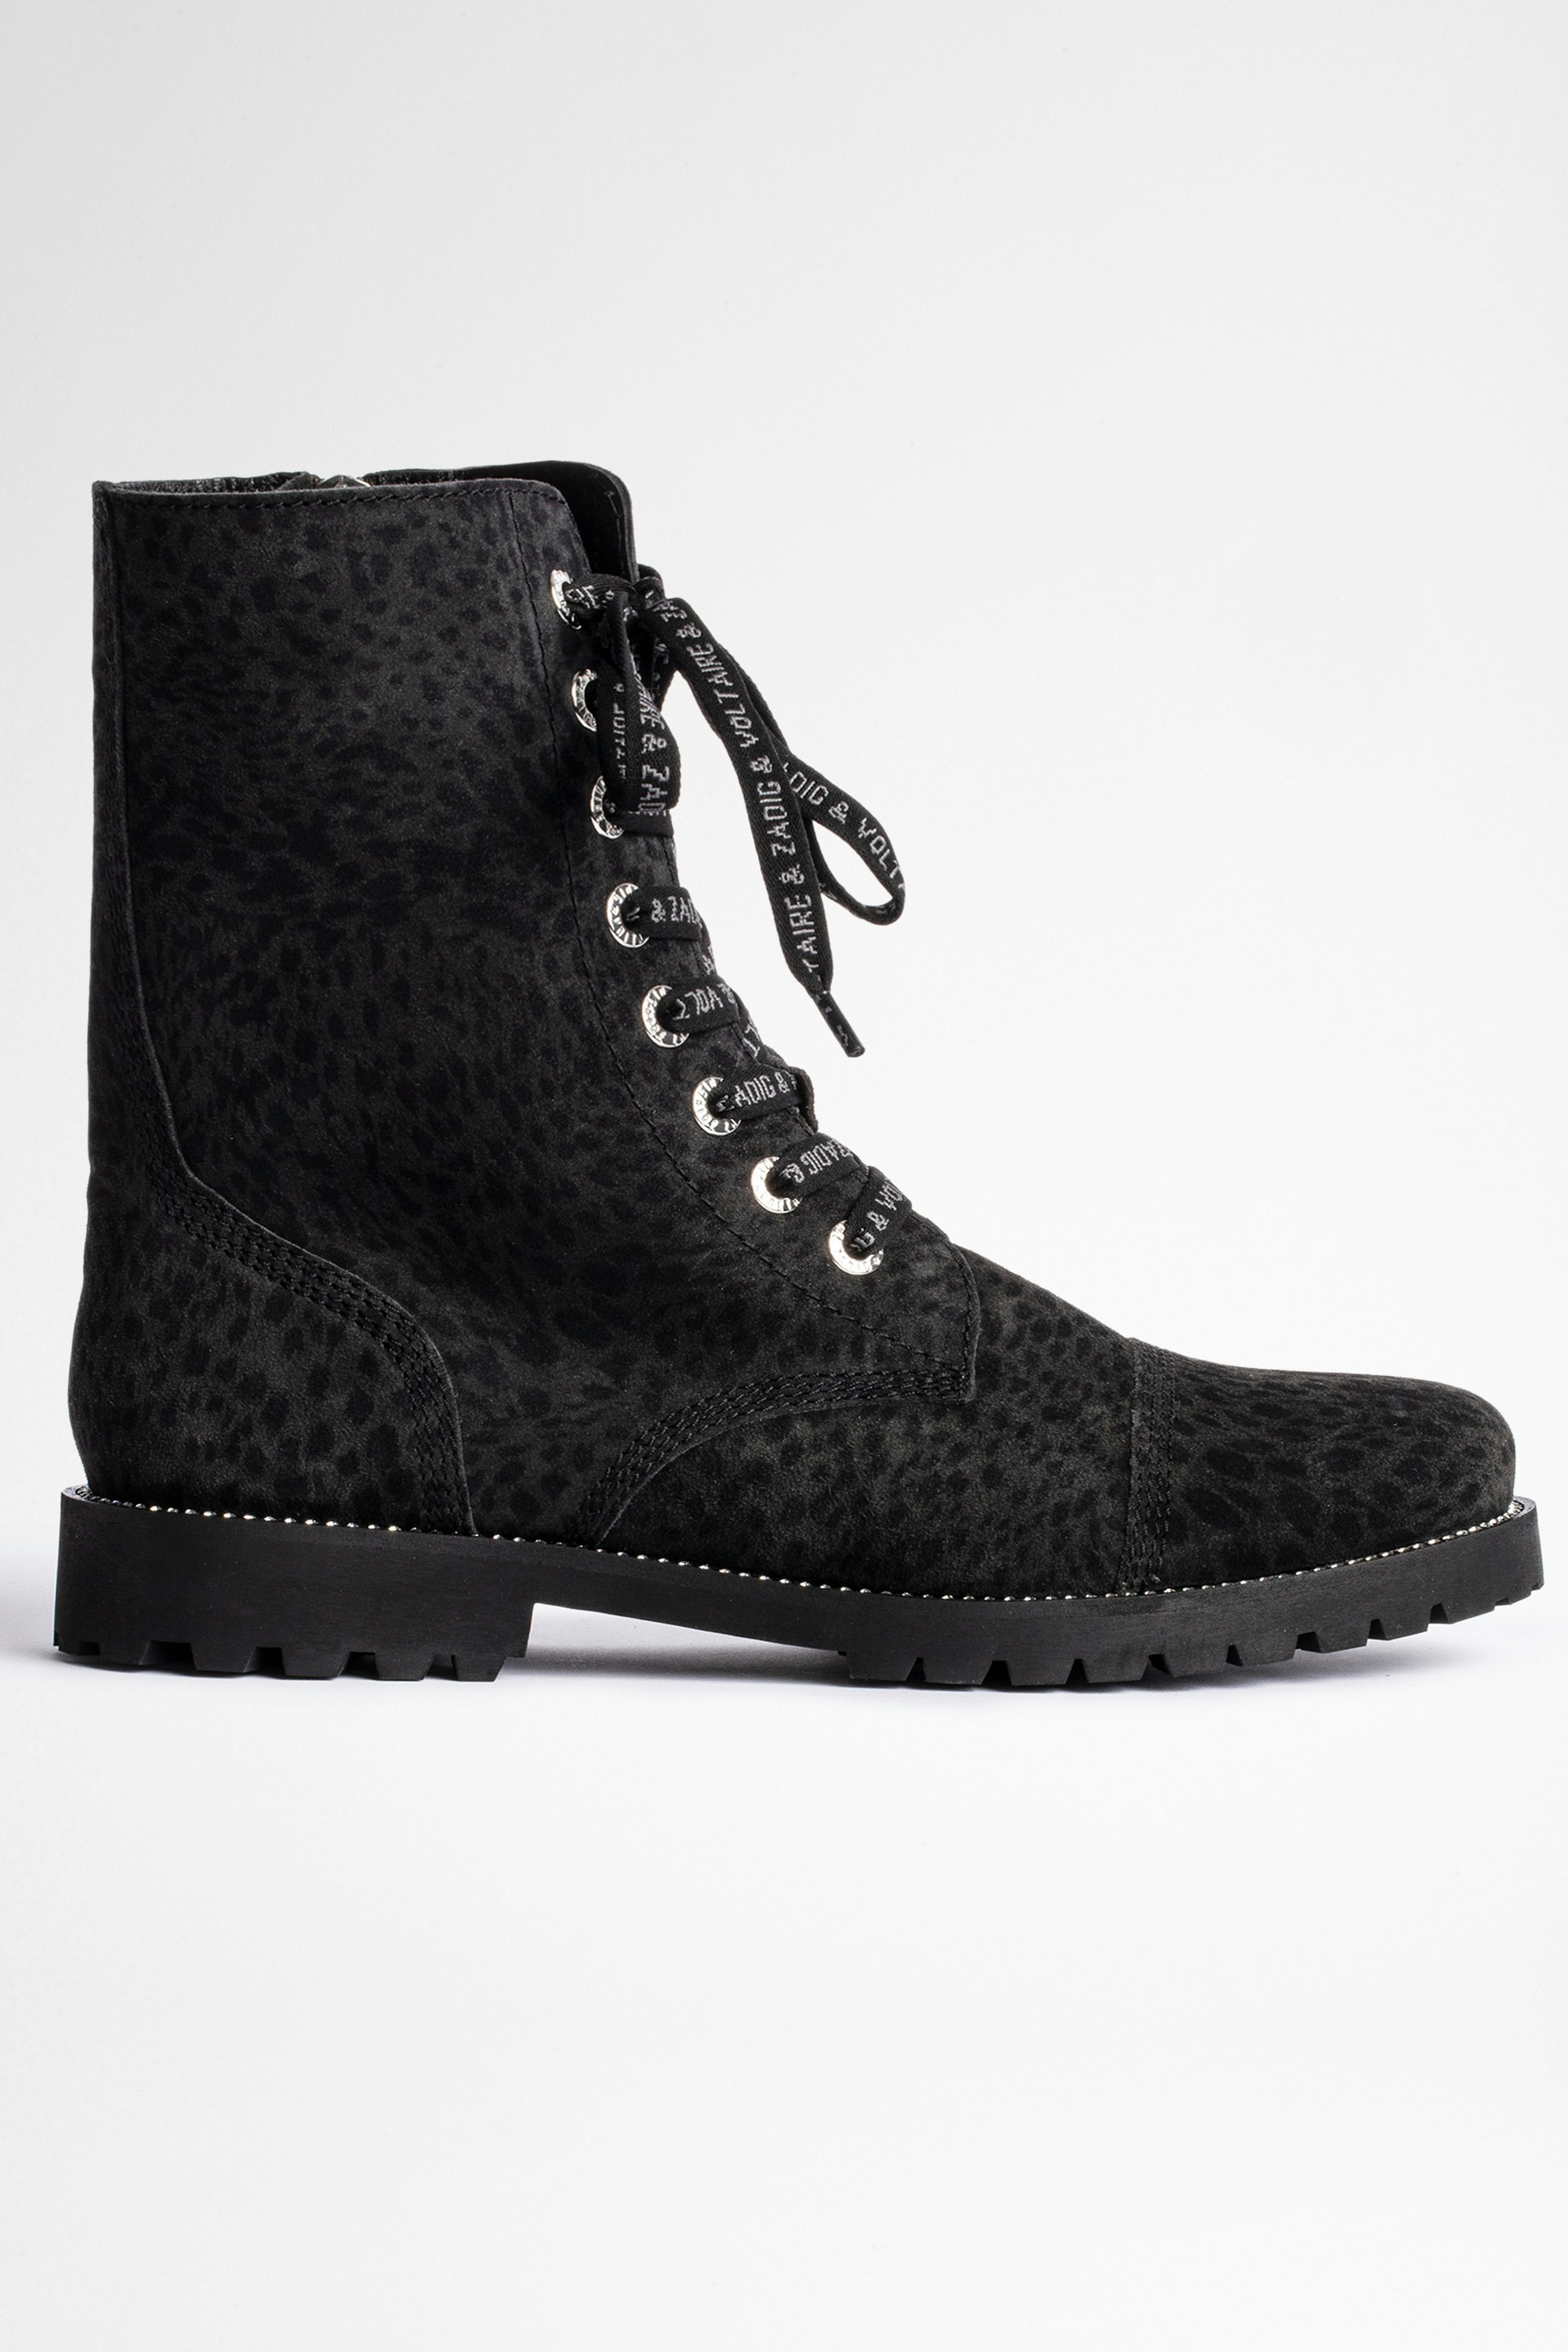 Joe Leo Ankle Boots Women's black suede studded ankle boots with leopard print